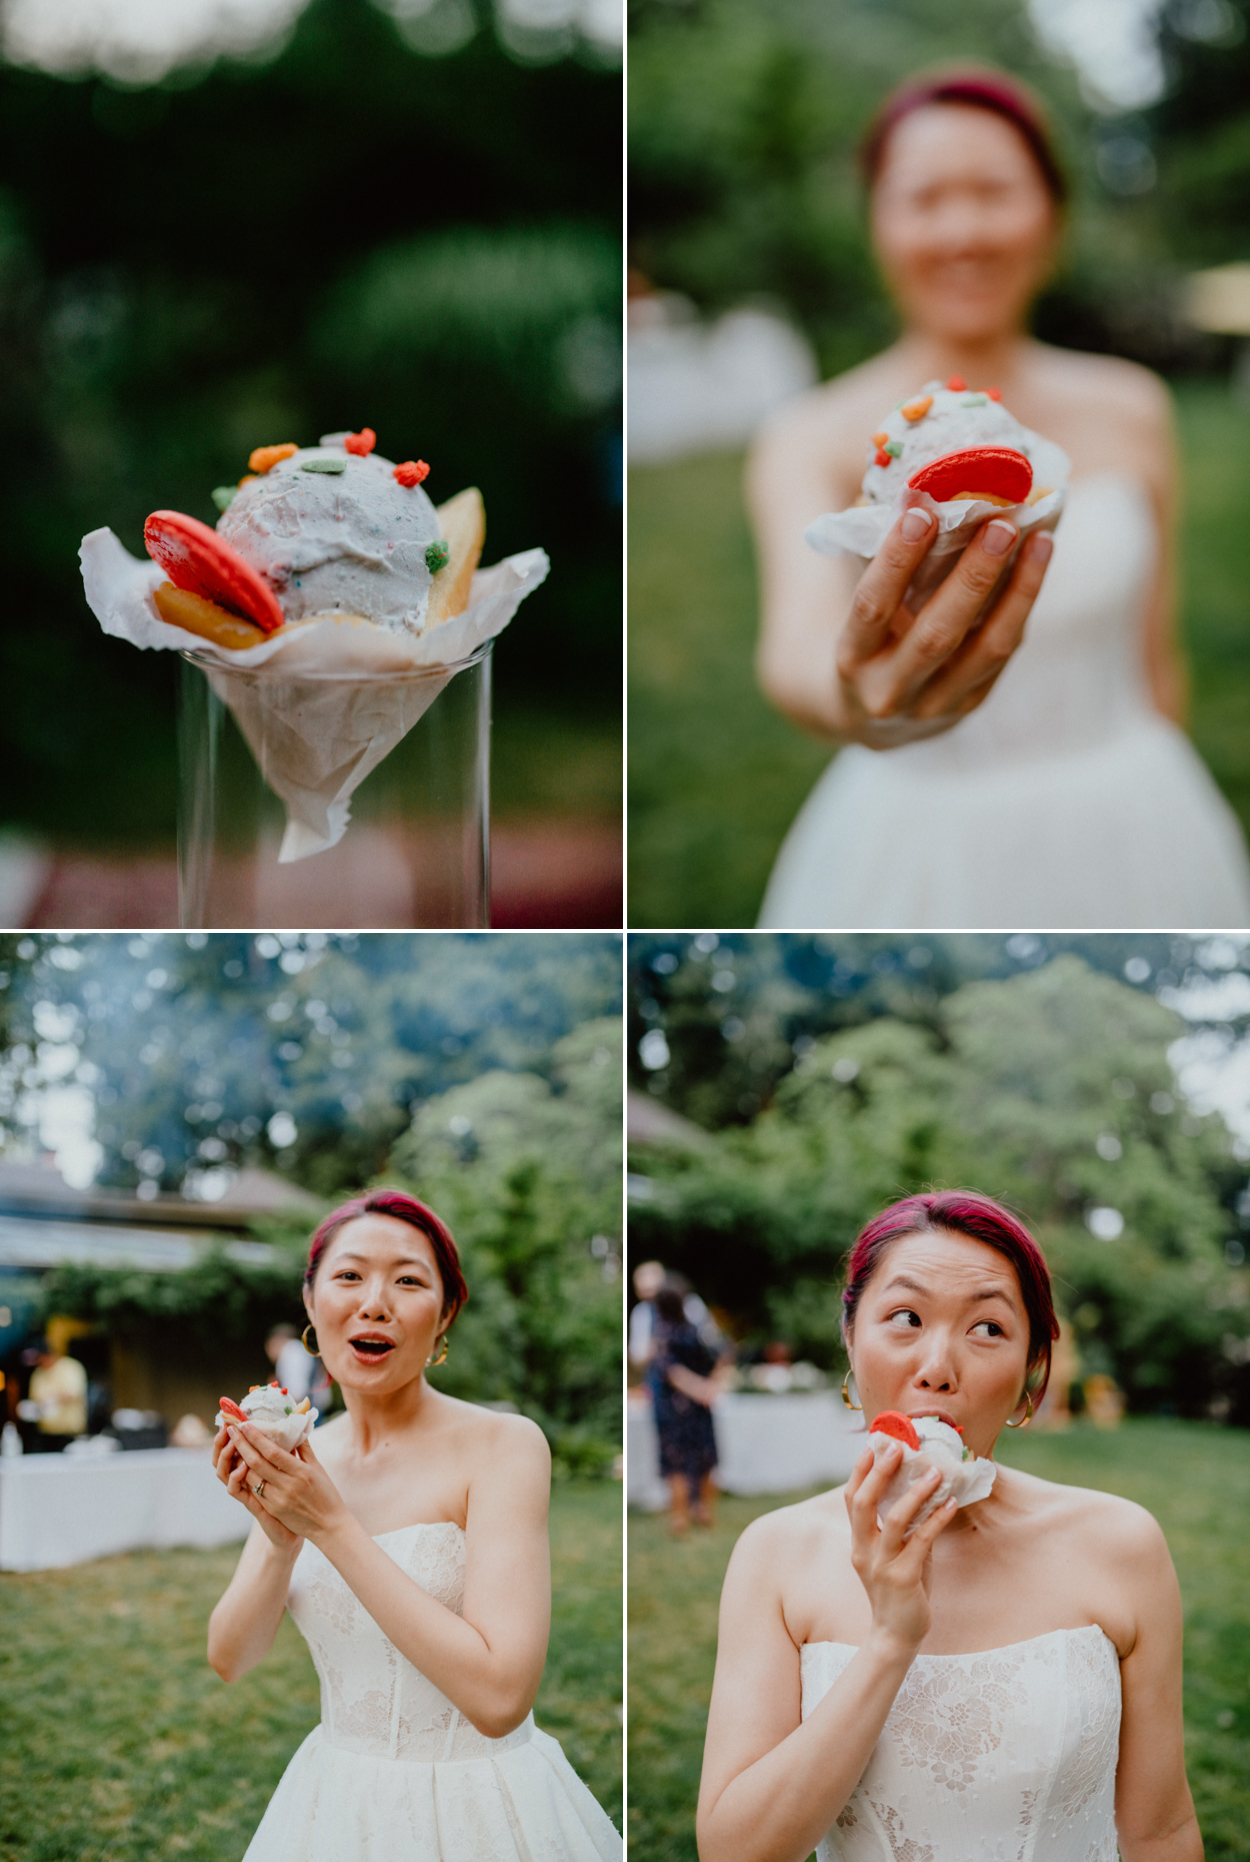 Bride eating ice cream by Pink's ice cream / Macadons